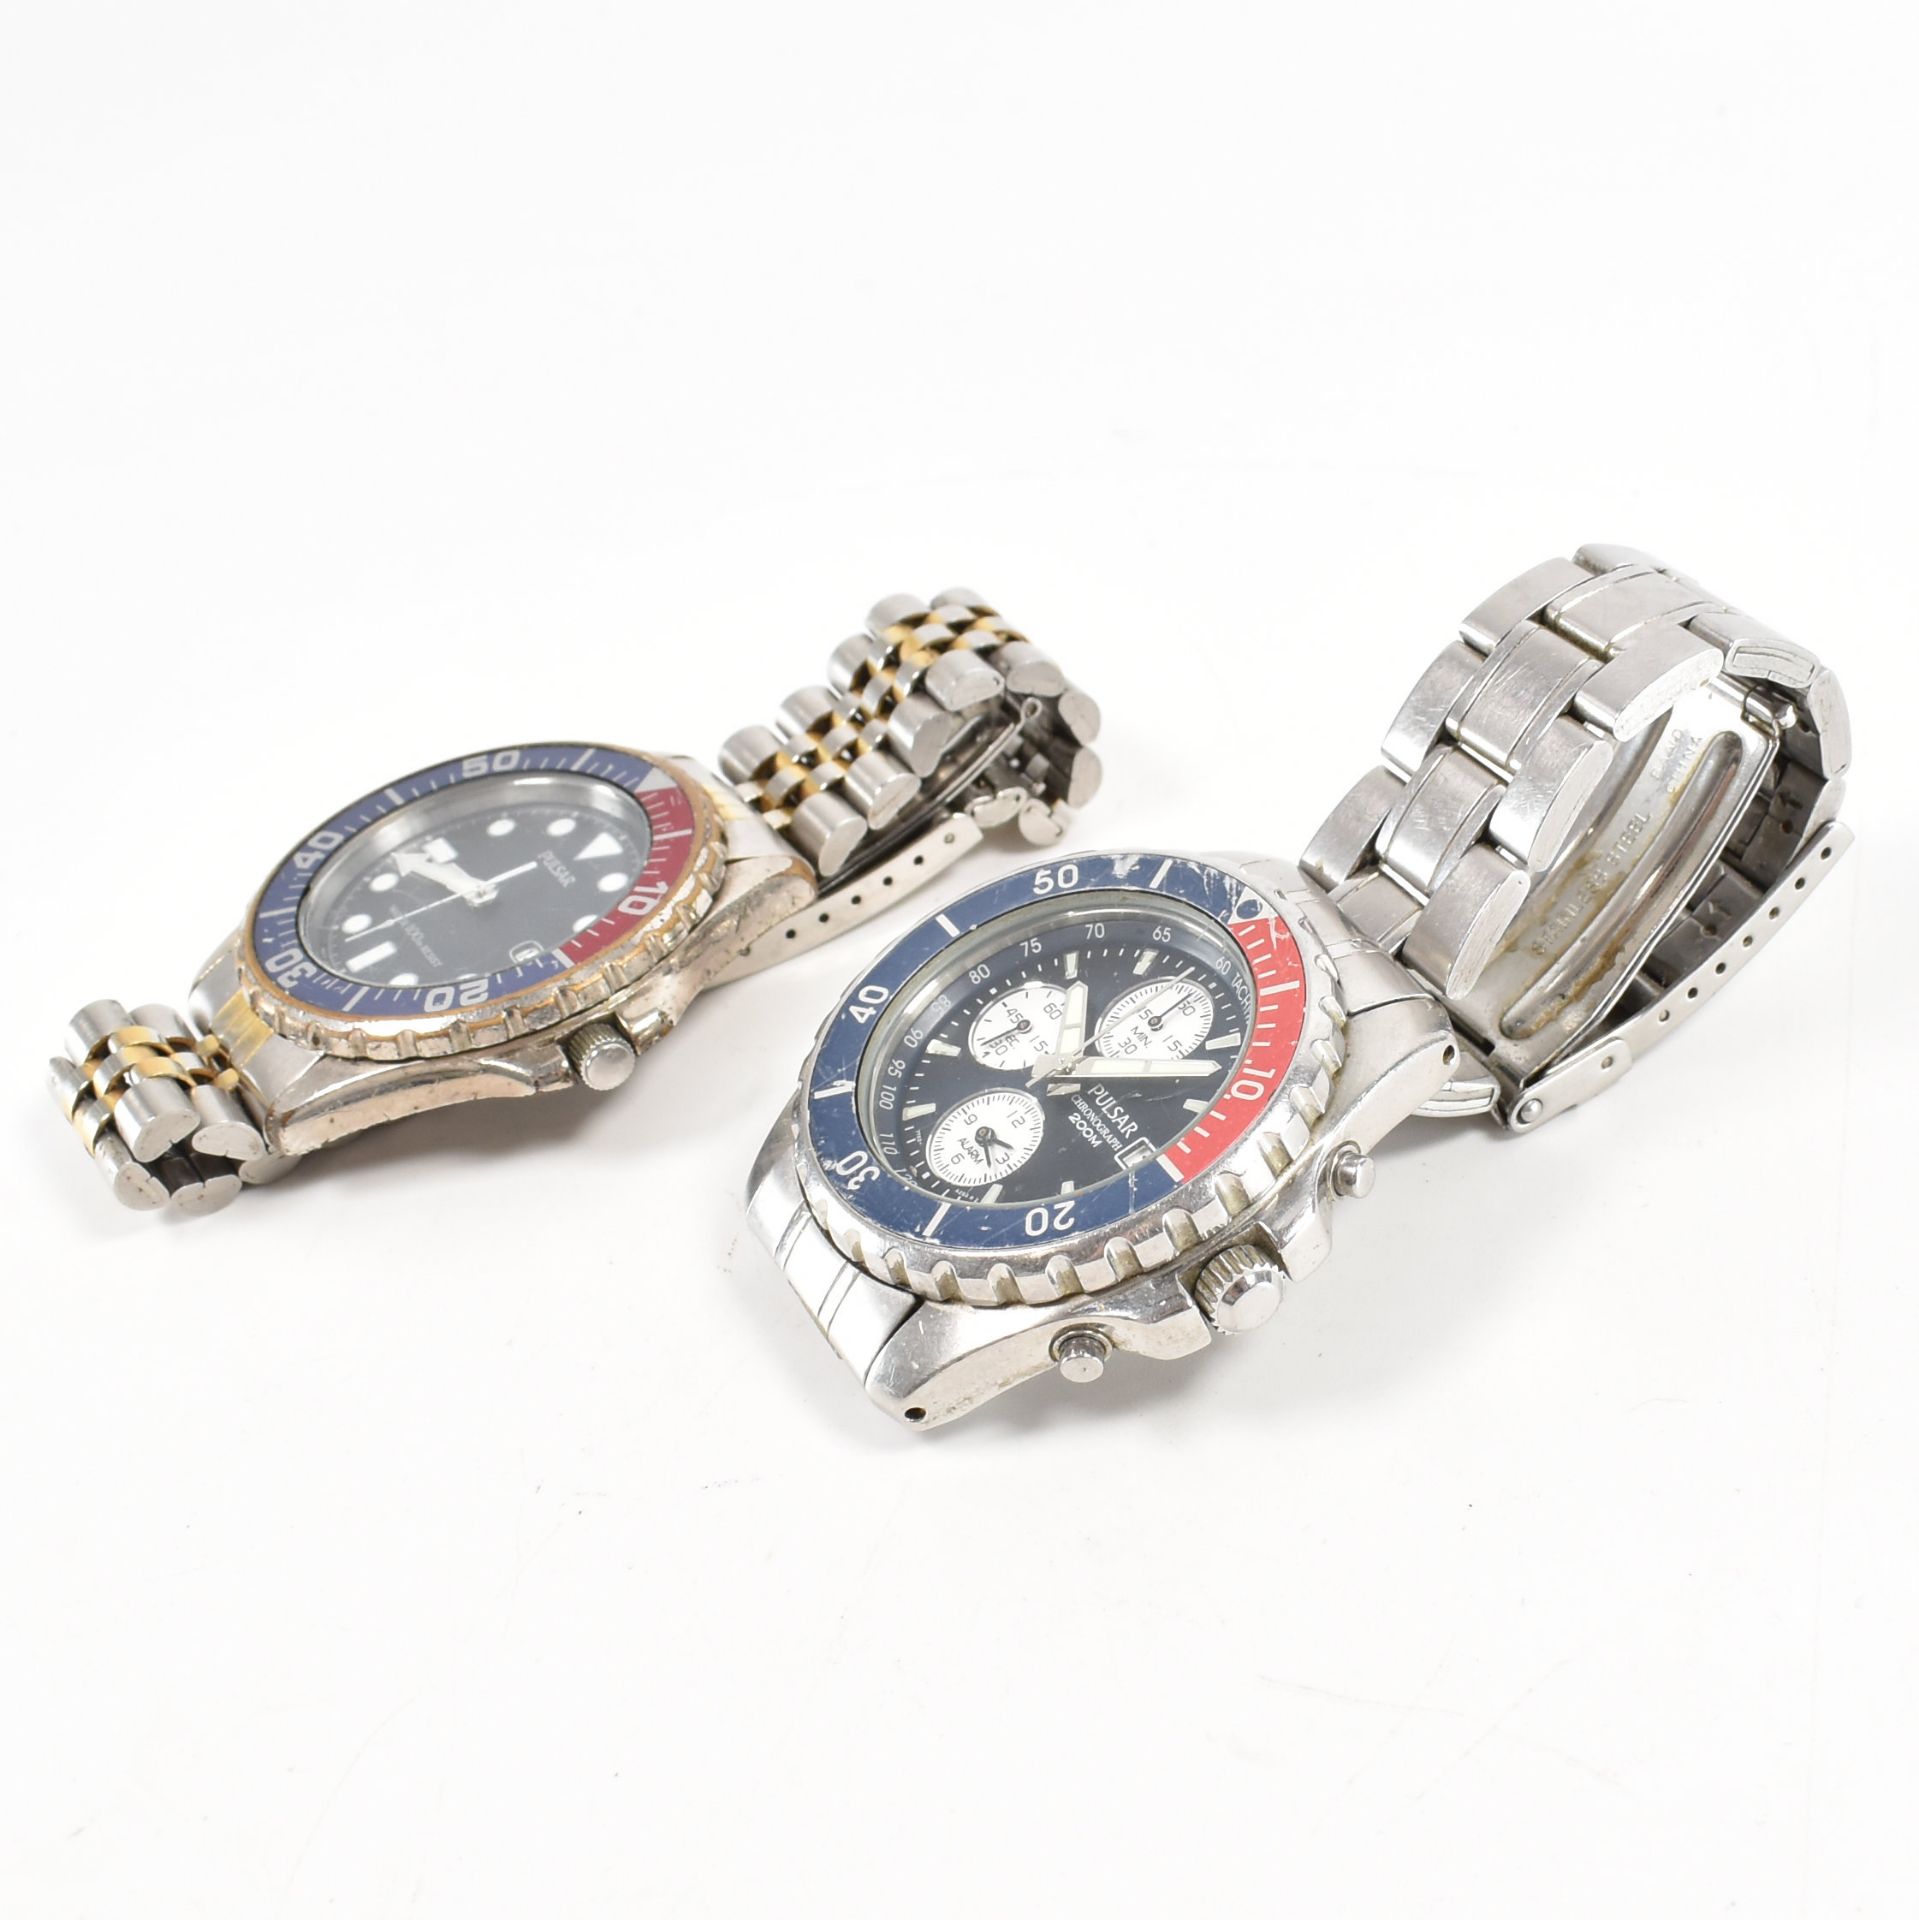 TWO PULSAR 'PEPSI DIAL WRIST WATCHES - Image 2 of 5